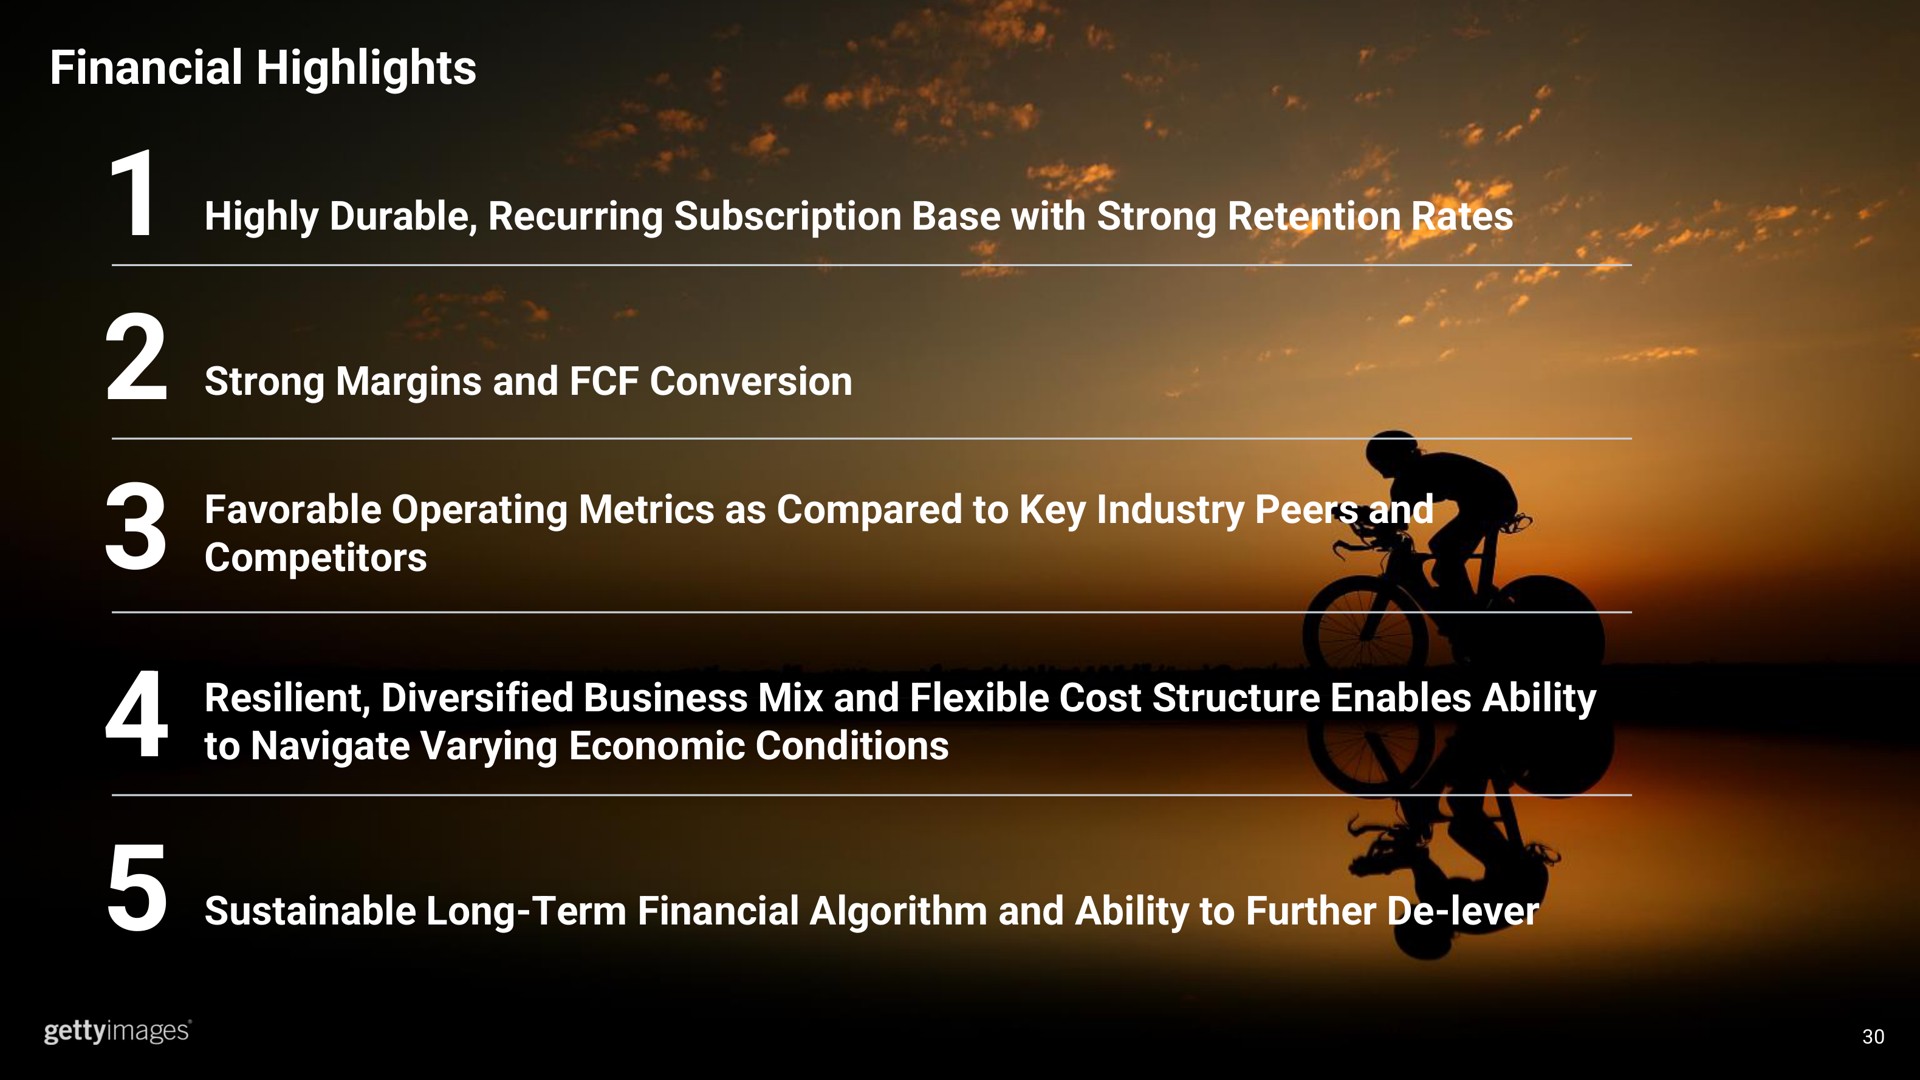 financial highlights highly durable recurring subscription base with strong retention rates strong margins and conversion favorable operating metrics as compared to key industry peers and competitors resilient diversified business mix and flexible cost structure enables ability to navigate varying economic conditions sustainable long term financial algorithm and ability to further lever a be a matey on | Getty